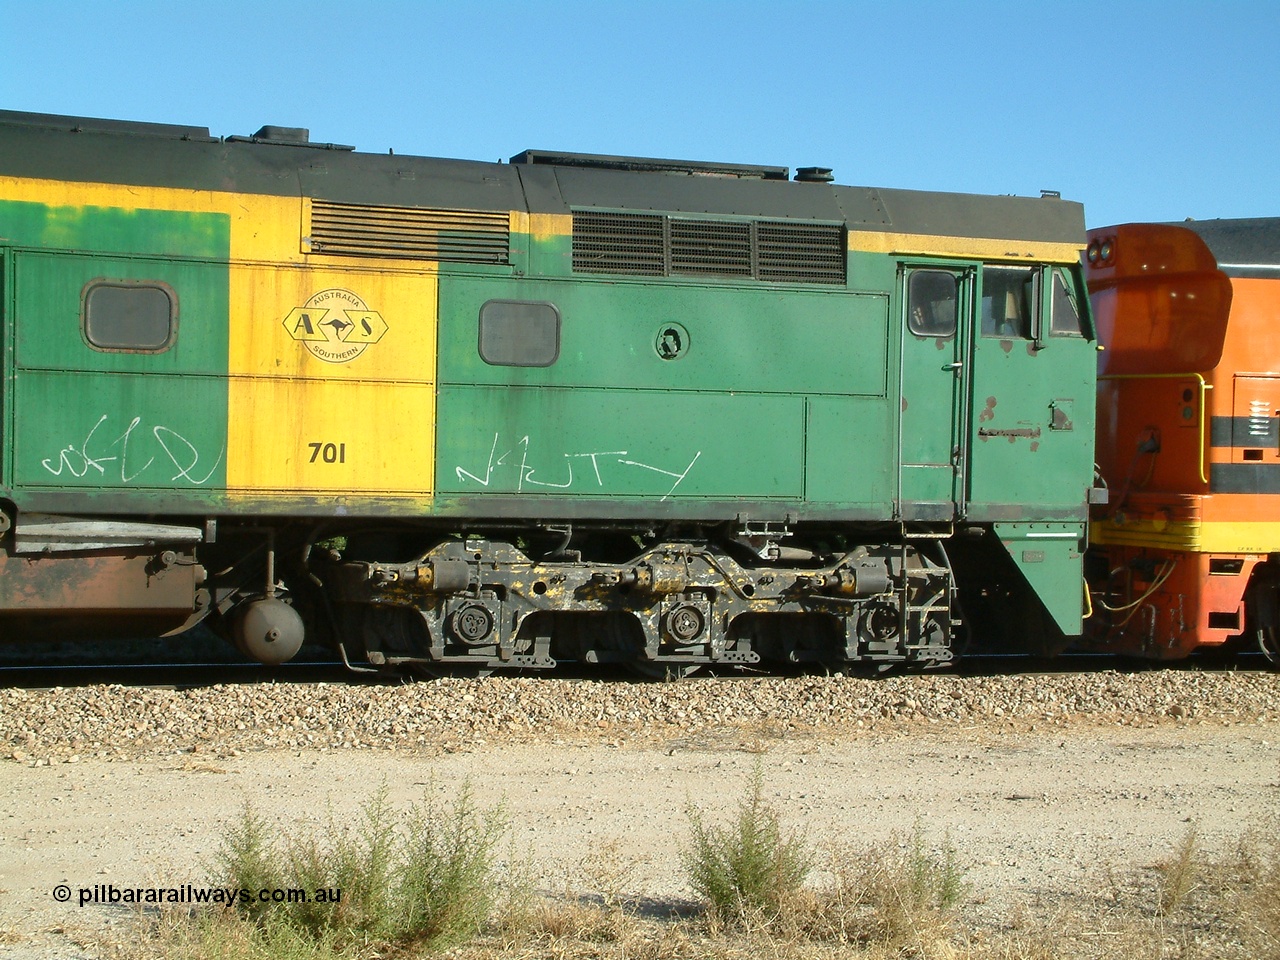 030403 154951
Gladstone, former South Australian Railways AE Goodwin built DL500G ALCo designated the 700 class, class leader 701 serial G6042-2, B end cab side shot, leads a grain train being loaded on the 3rd April 2003.
Keywords: 700-class;701;G6042-2;AE-Goodwin;ALCo;DL500G;